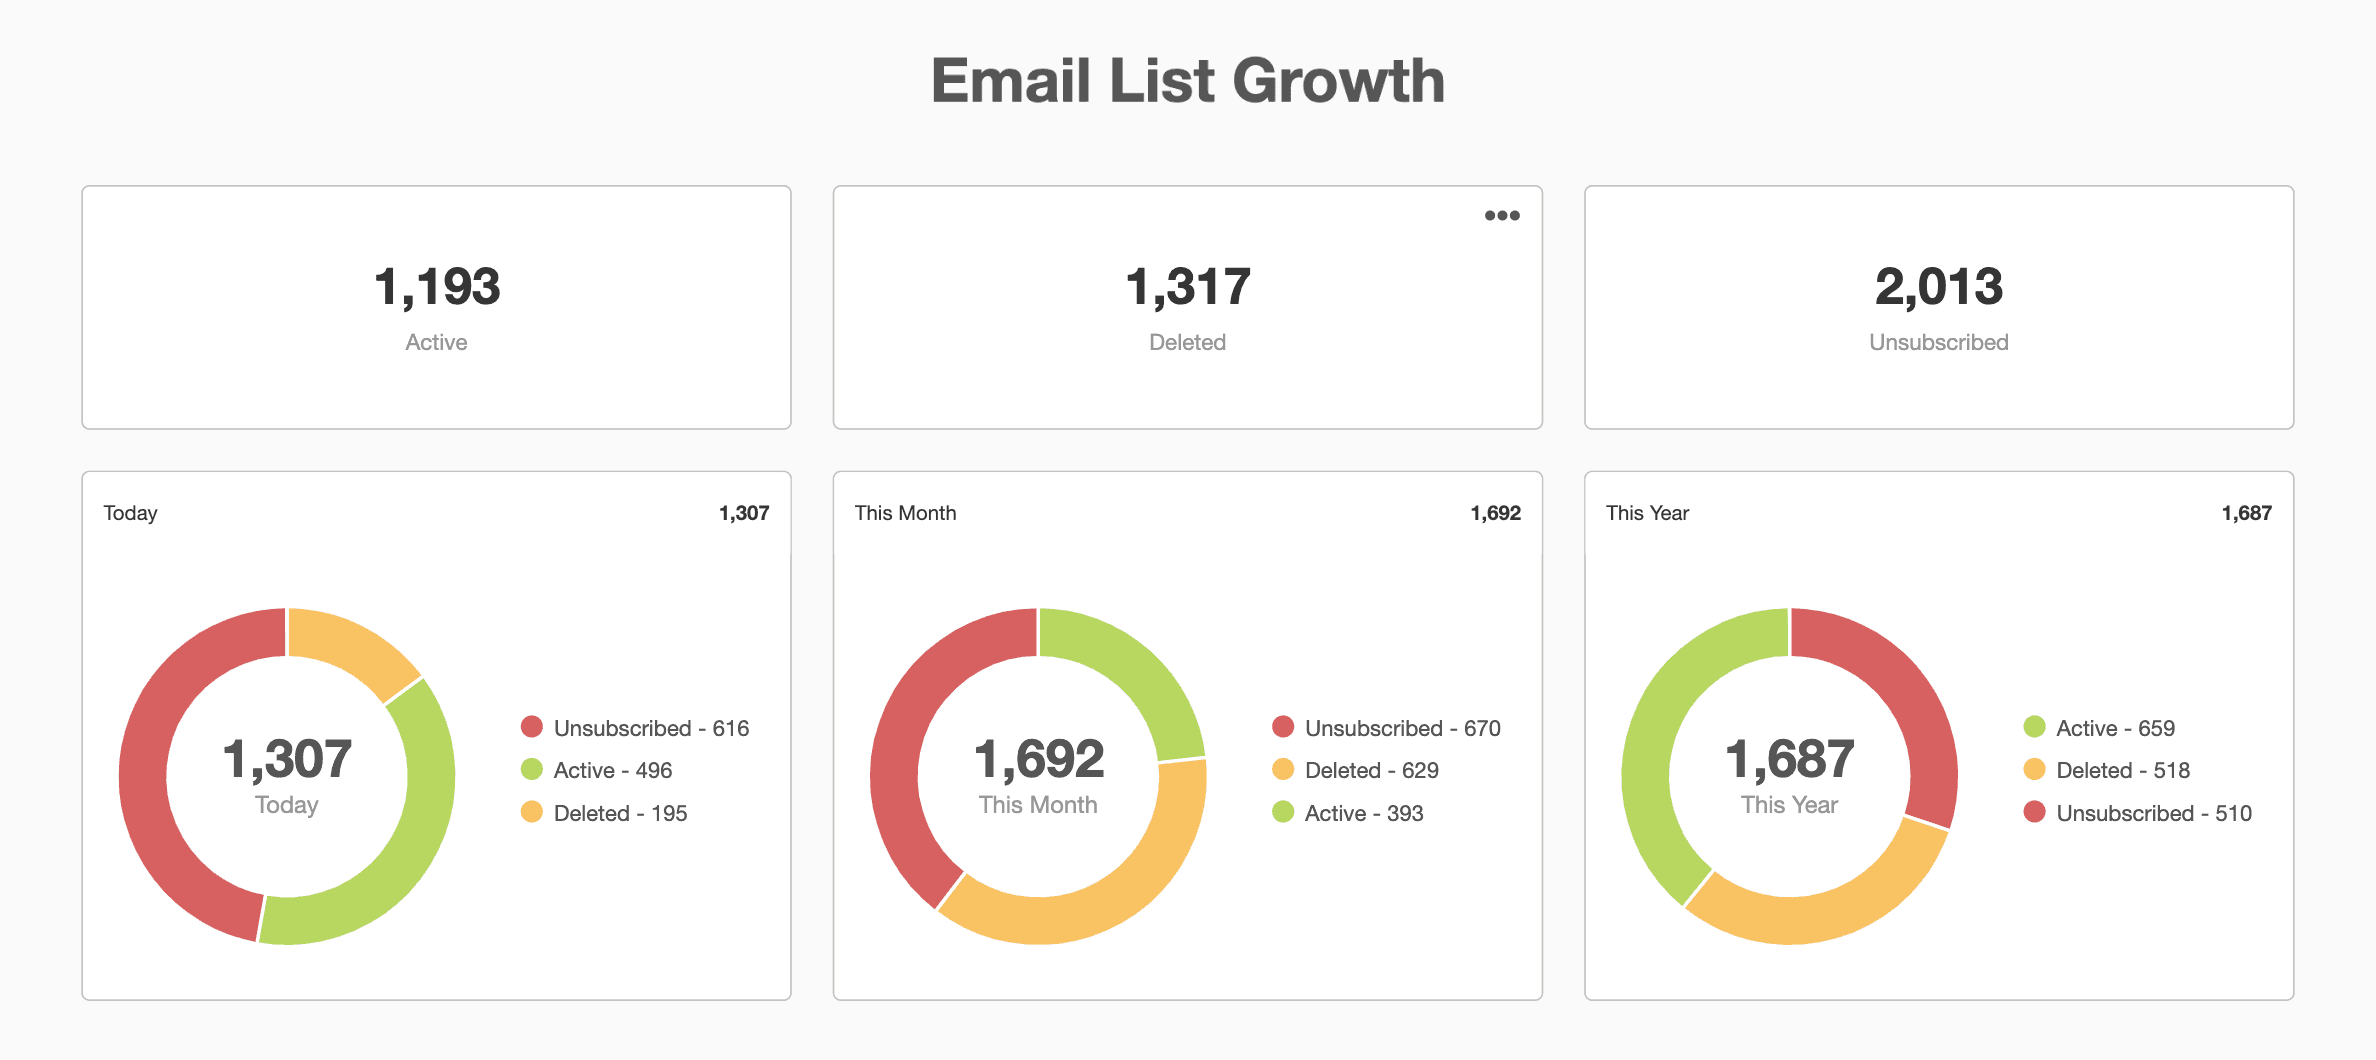 Email list growth report